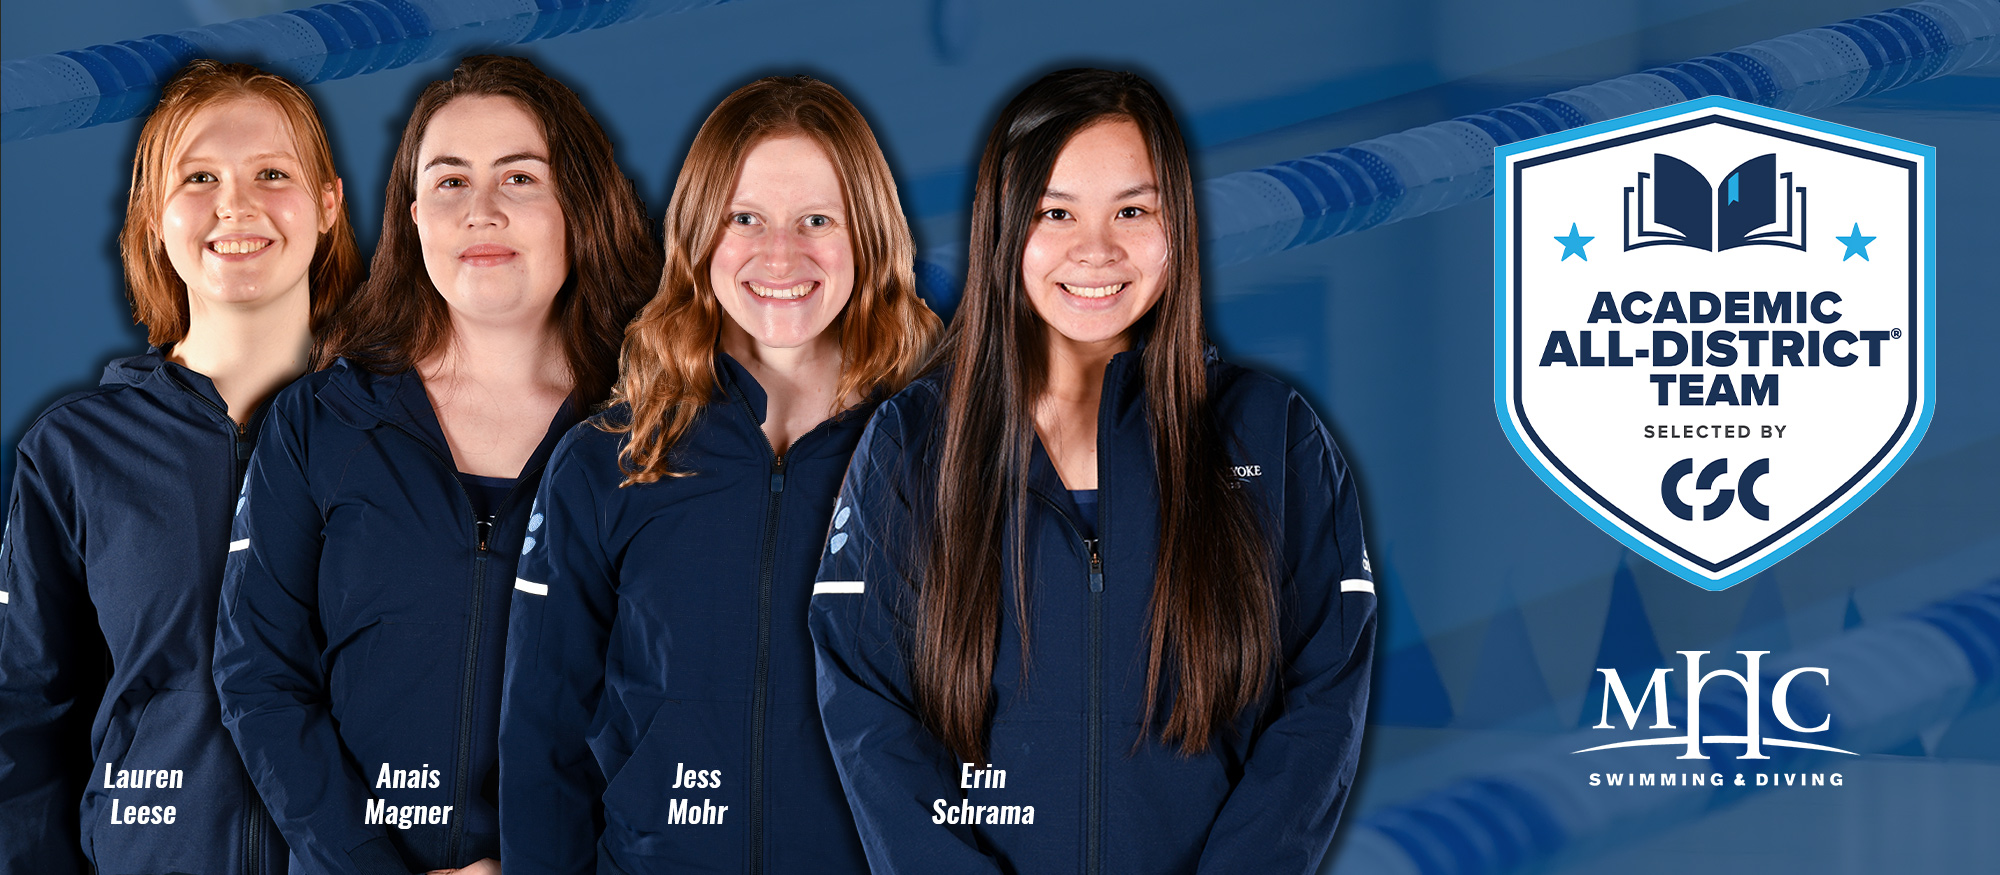 Swimming and diving team places four student-athletes on CSC Academic All-District Team